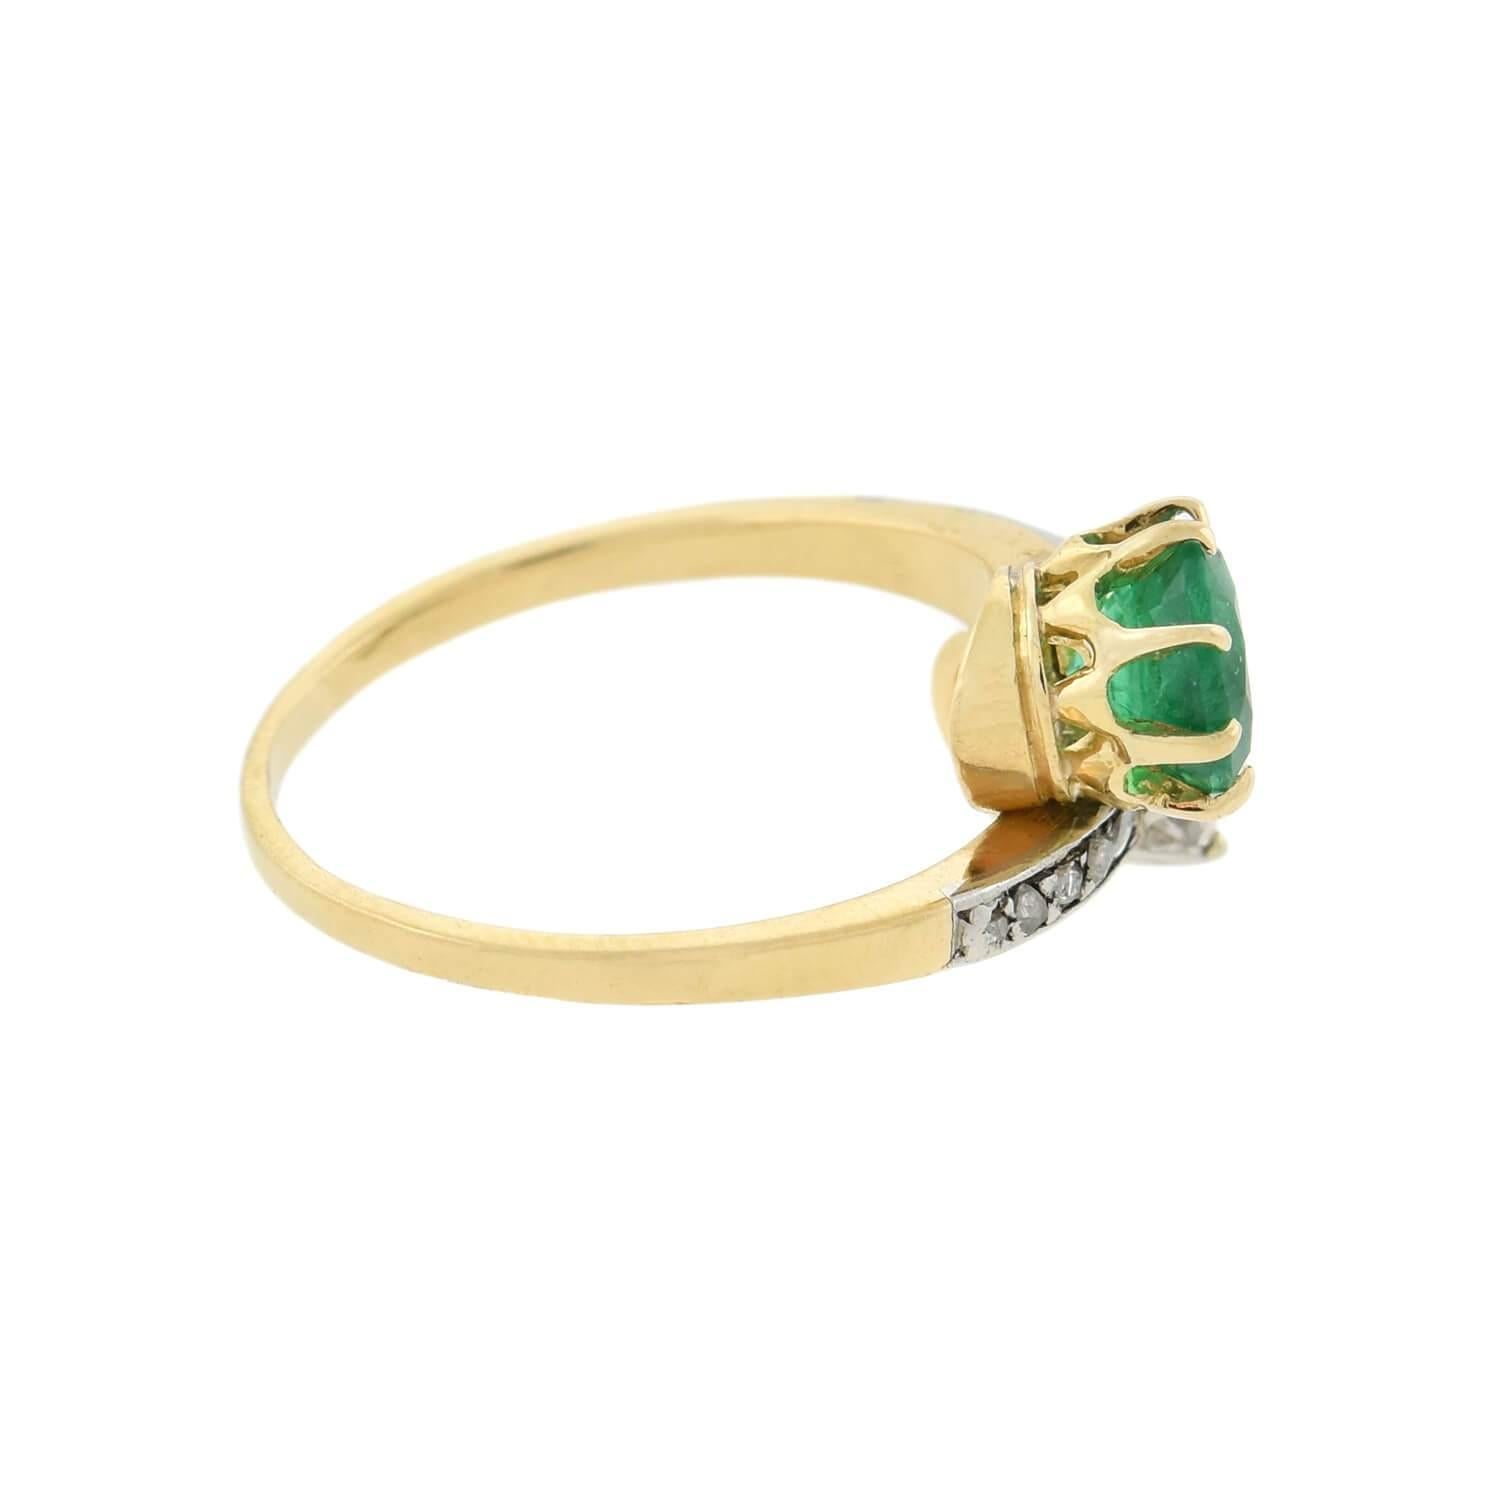 A unique and exquisite diamond bypass ring from the Edwardian (ca1910) era! Crafted in 18kt yellow gold topped with platinum, this piece features an Old European Cut diamond and a vibrant green Round emerald nestled together at the center, forming a